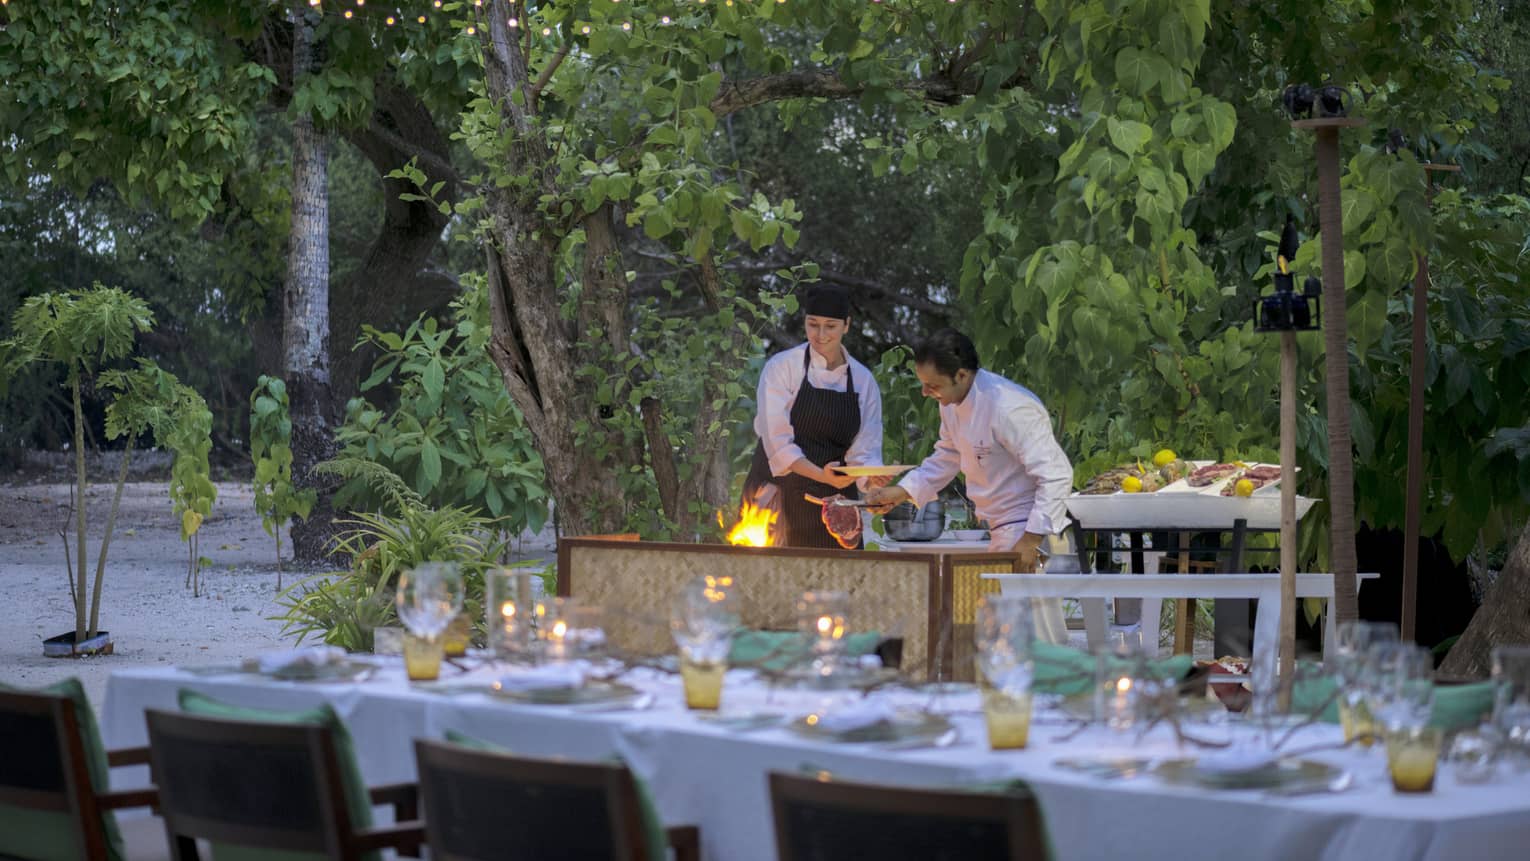 Chefs put large steak on flaming grill by long outdoor dining table, patio lights at night